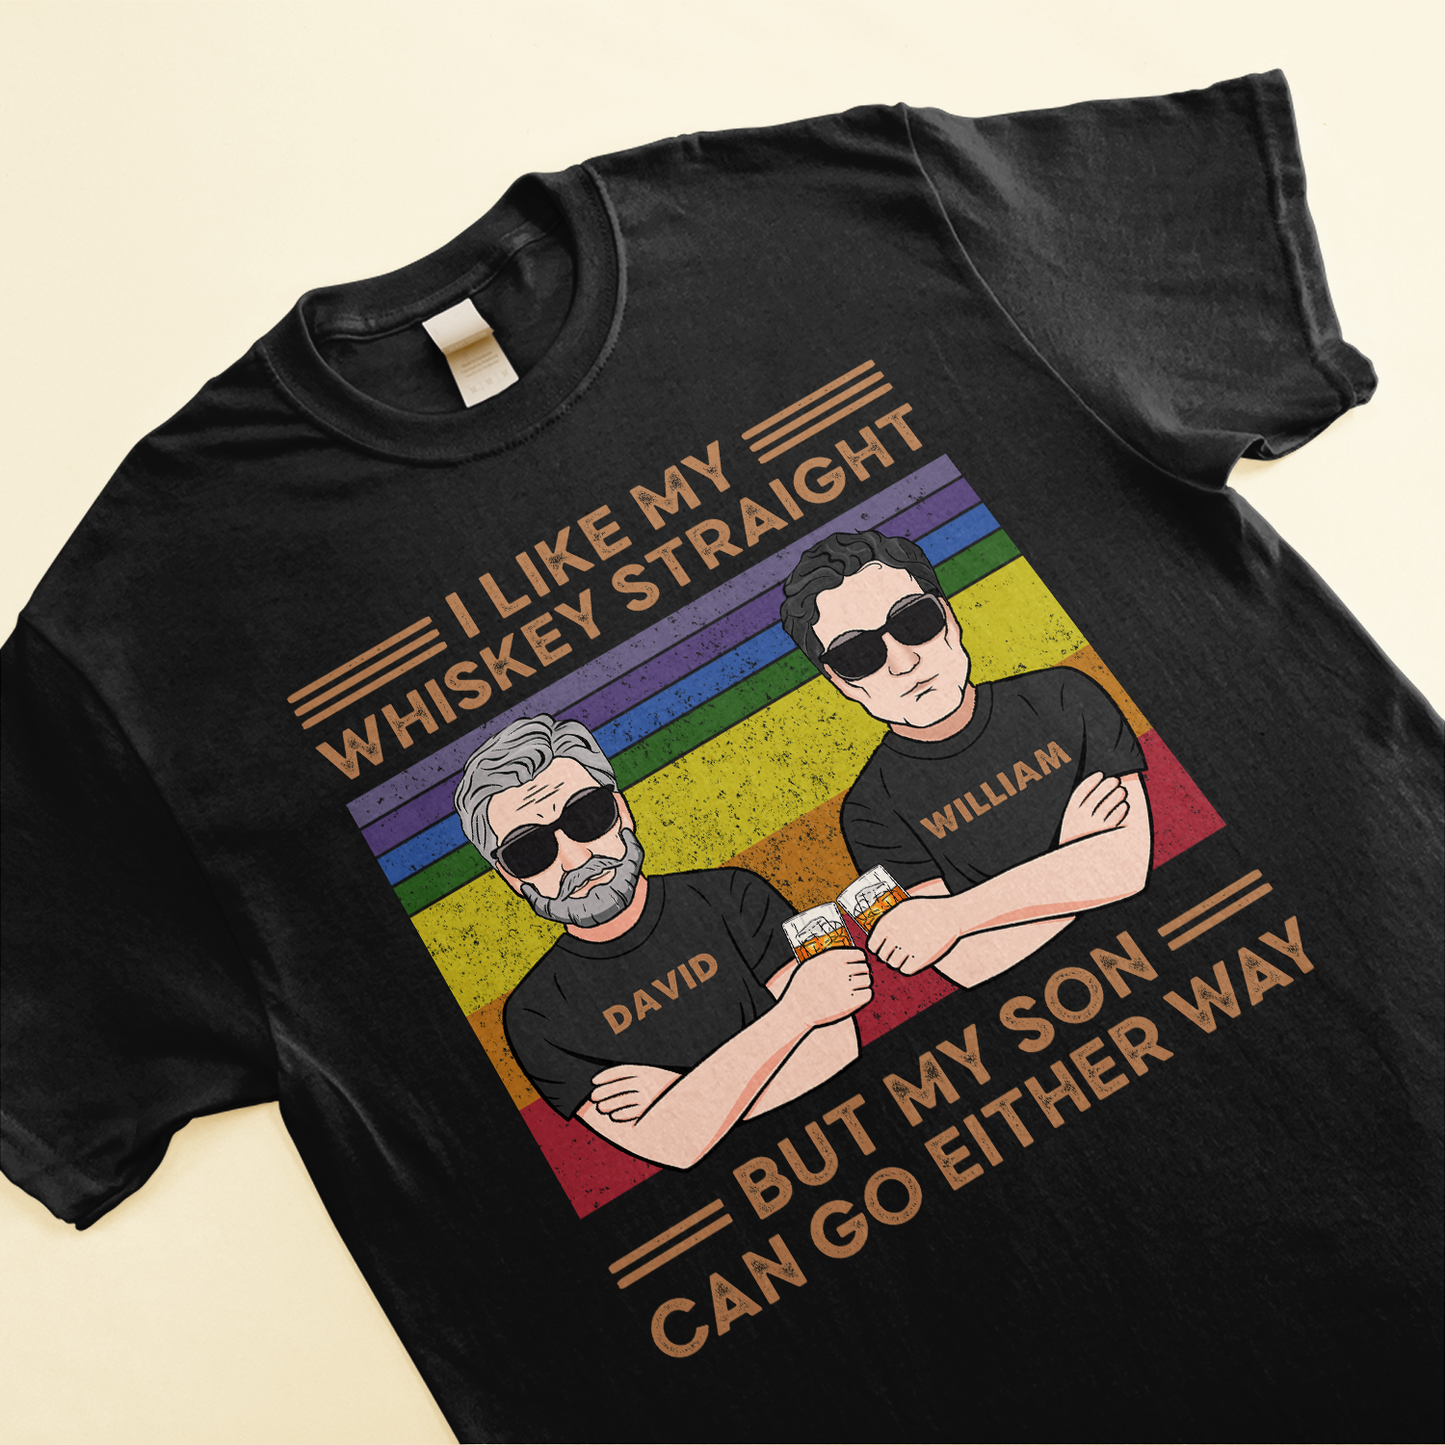 I Like My Whiskey Straight But My Son Can Go Either Way - Personalized Shirt - Birthday, Pride Month, LGBTIQ+ Support Gift For Proud Ally, LGBTIQ+ Supporters, Mother & Father